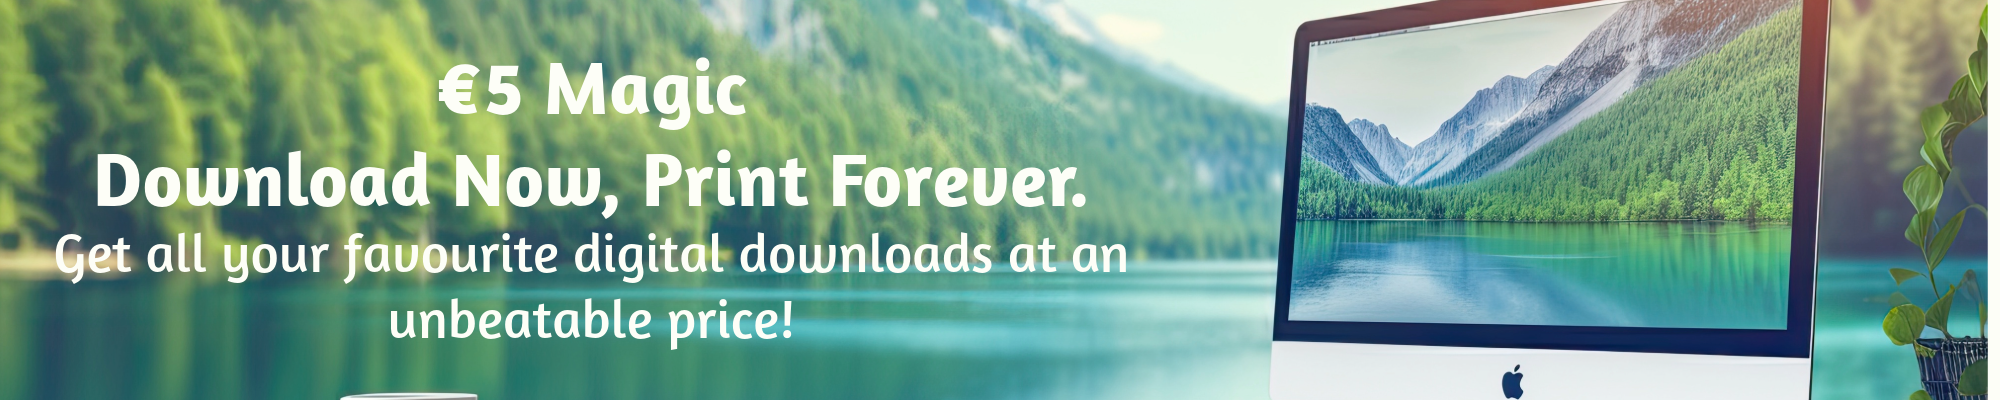 €5 Magic: Download Now, Print Forever.